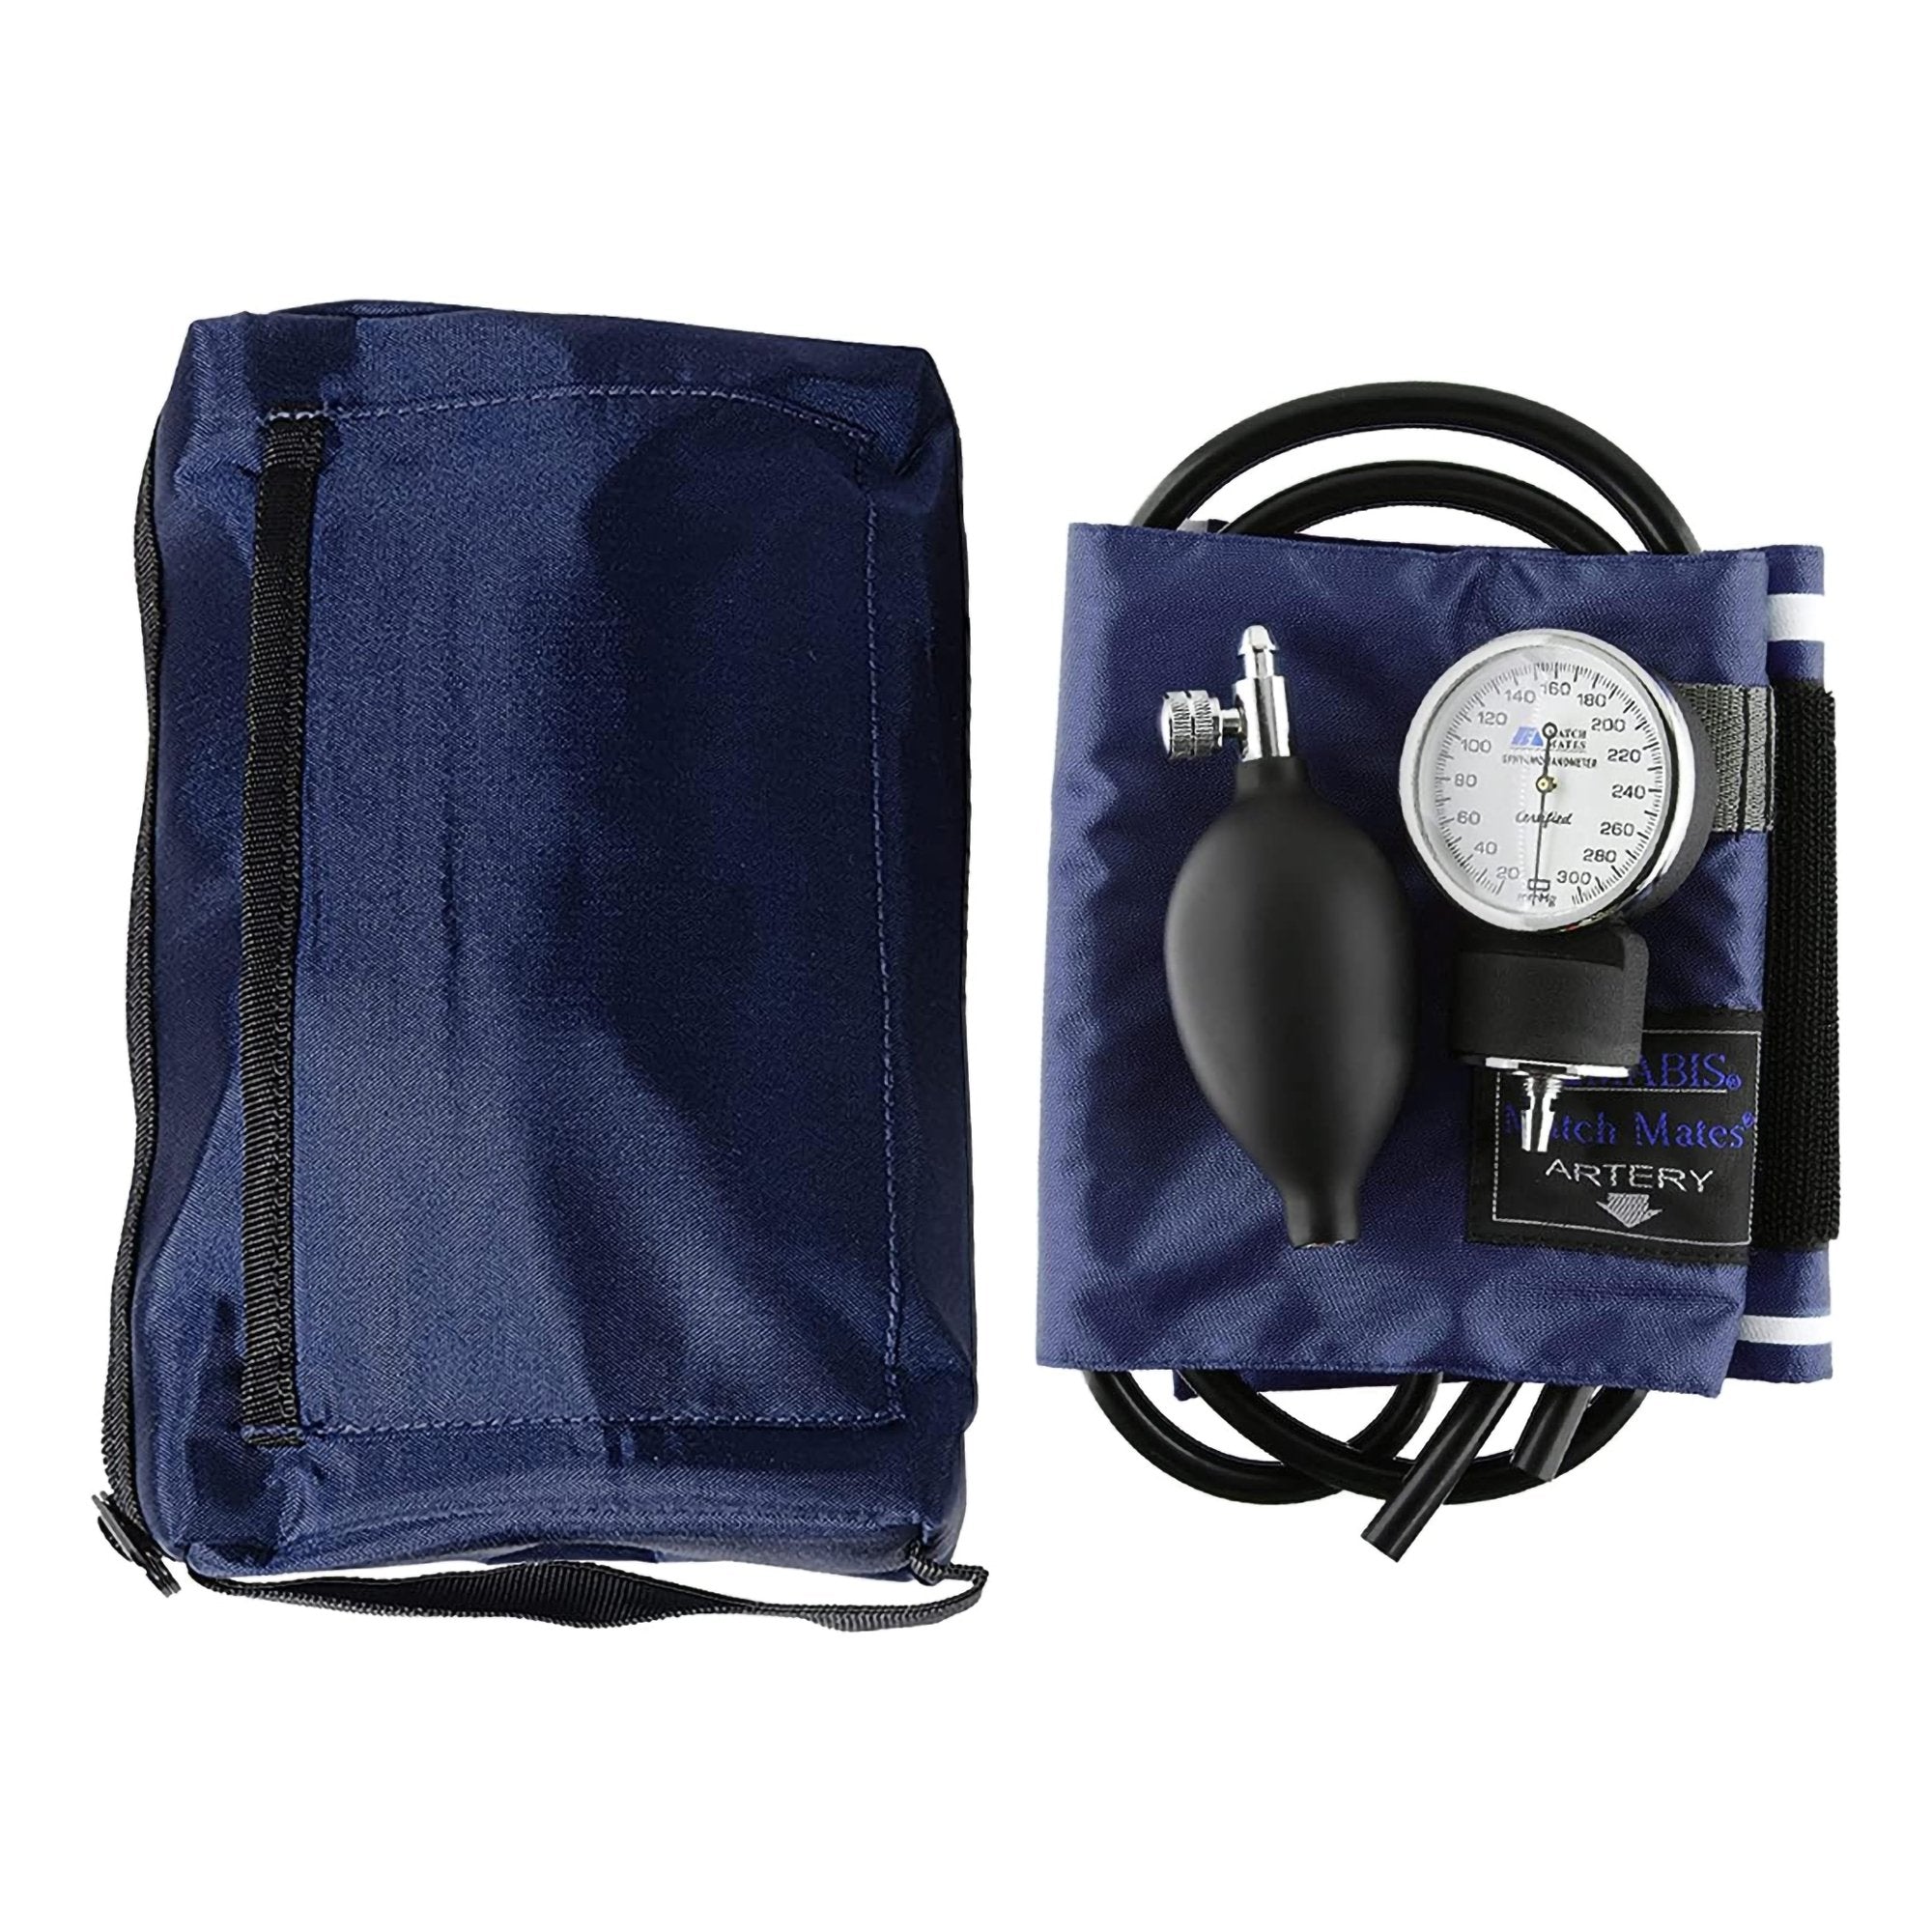 Mabis® Match Mates Manual Aneroid Sphygmomanometer with Cuff, Navy Blue